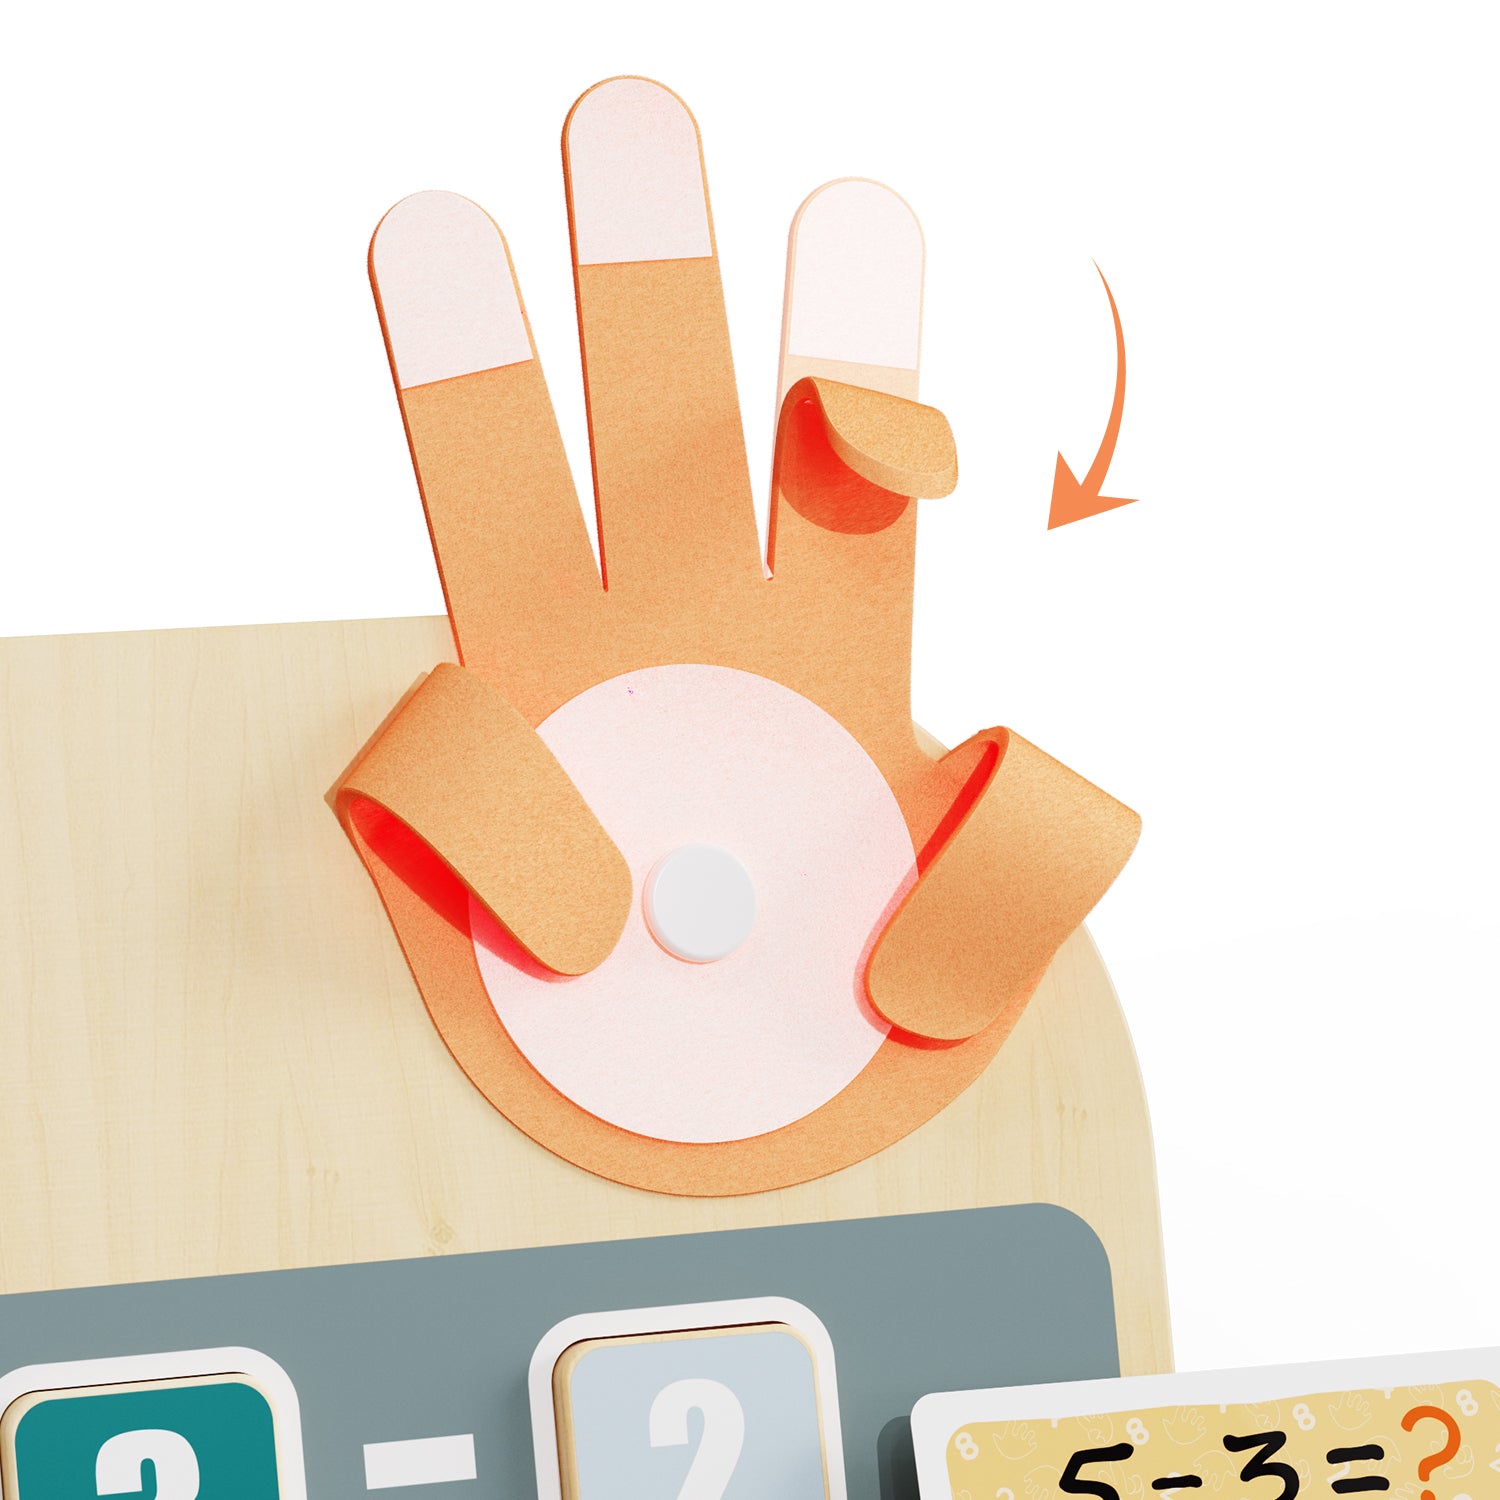 Kids attach the fingers in the middle of the hands with Velcro when practising counting.